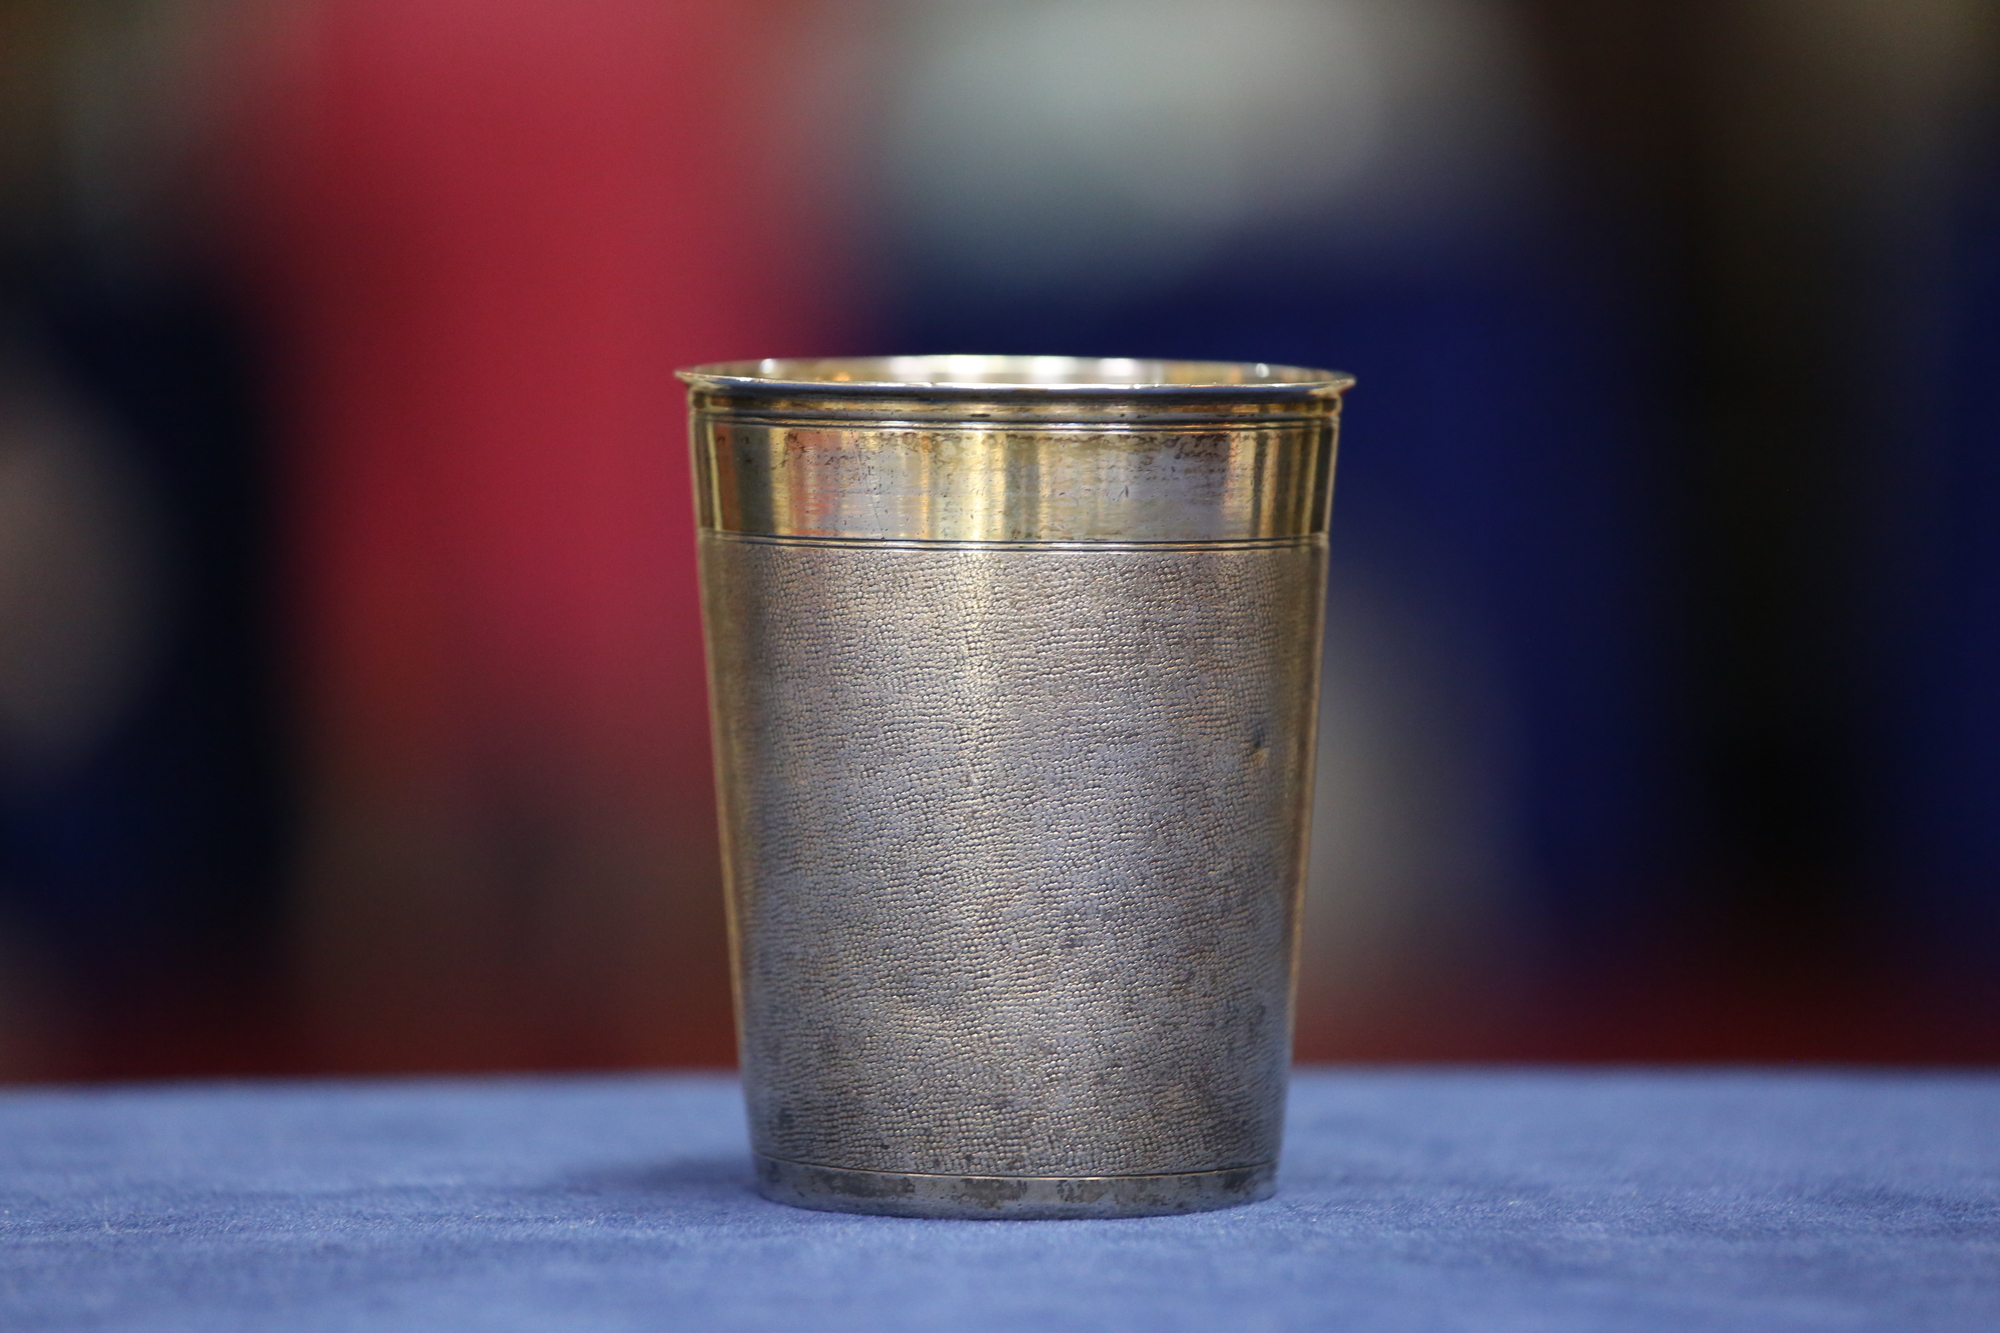 A 1654 Kiddush cup was appraised by Kerry Shrives during the Sarasota taping of 